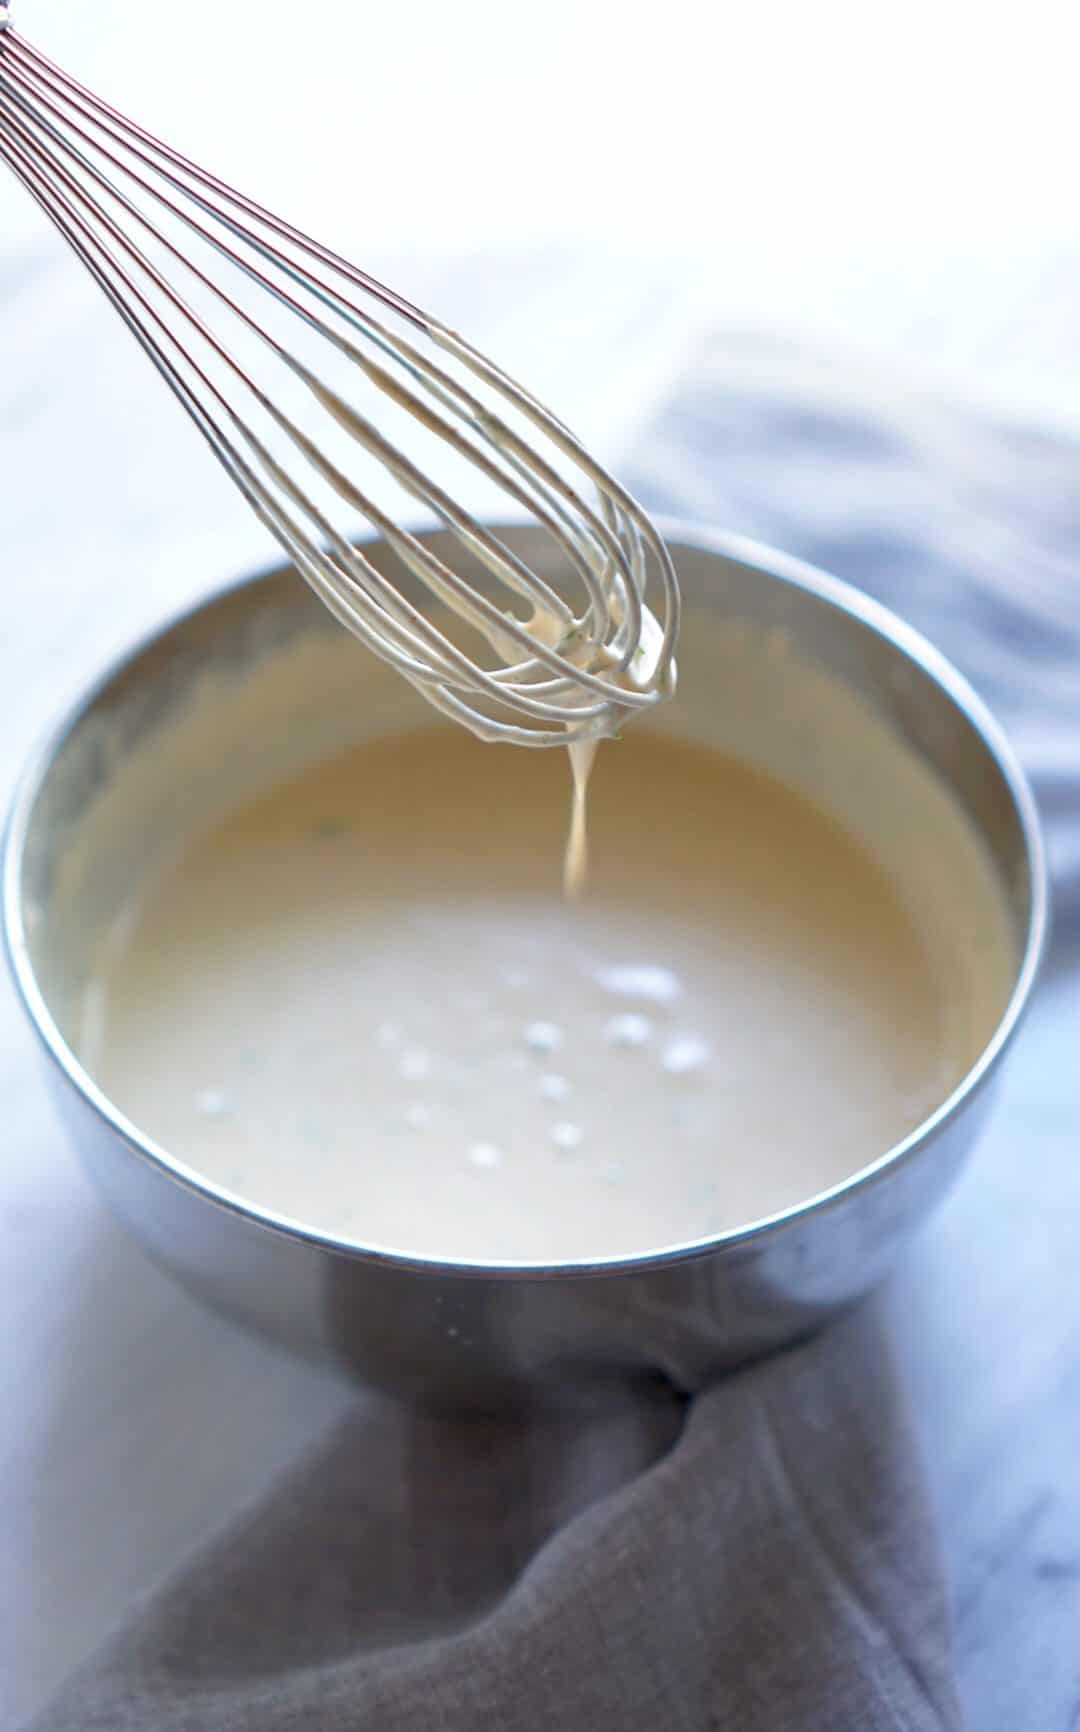 Whisk with tahini sauce dripping into a metal bowl